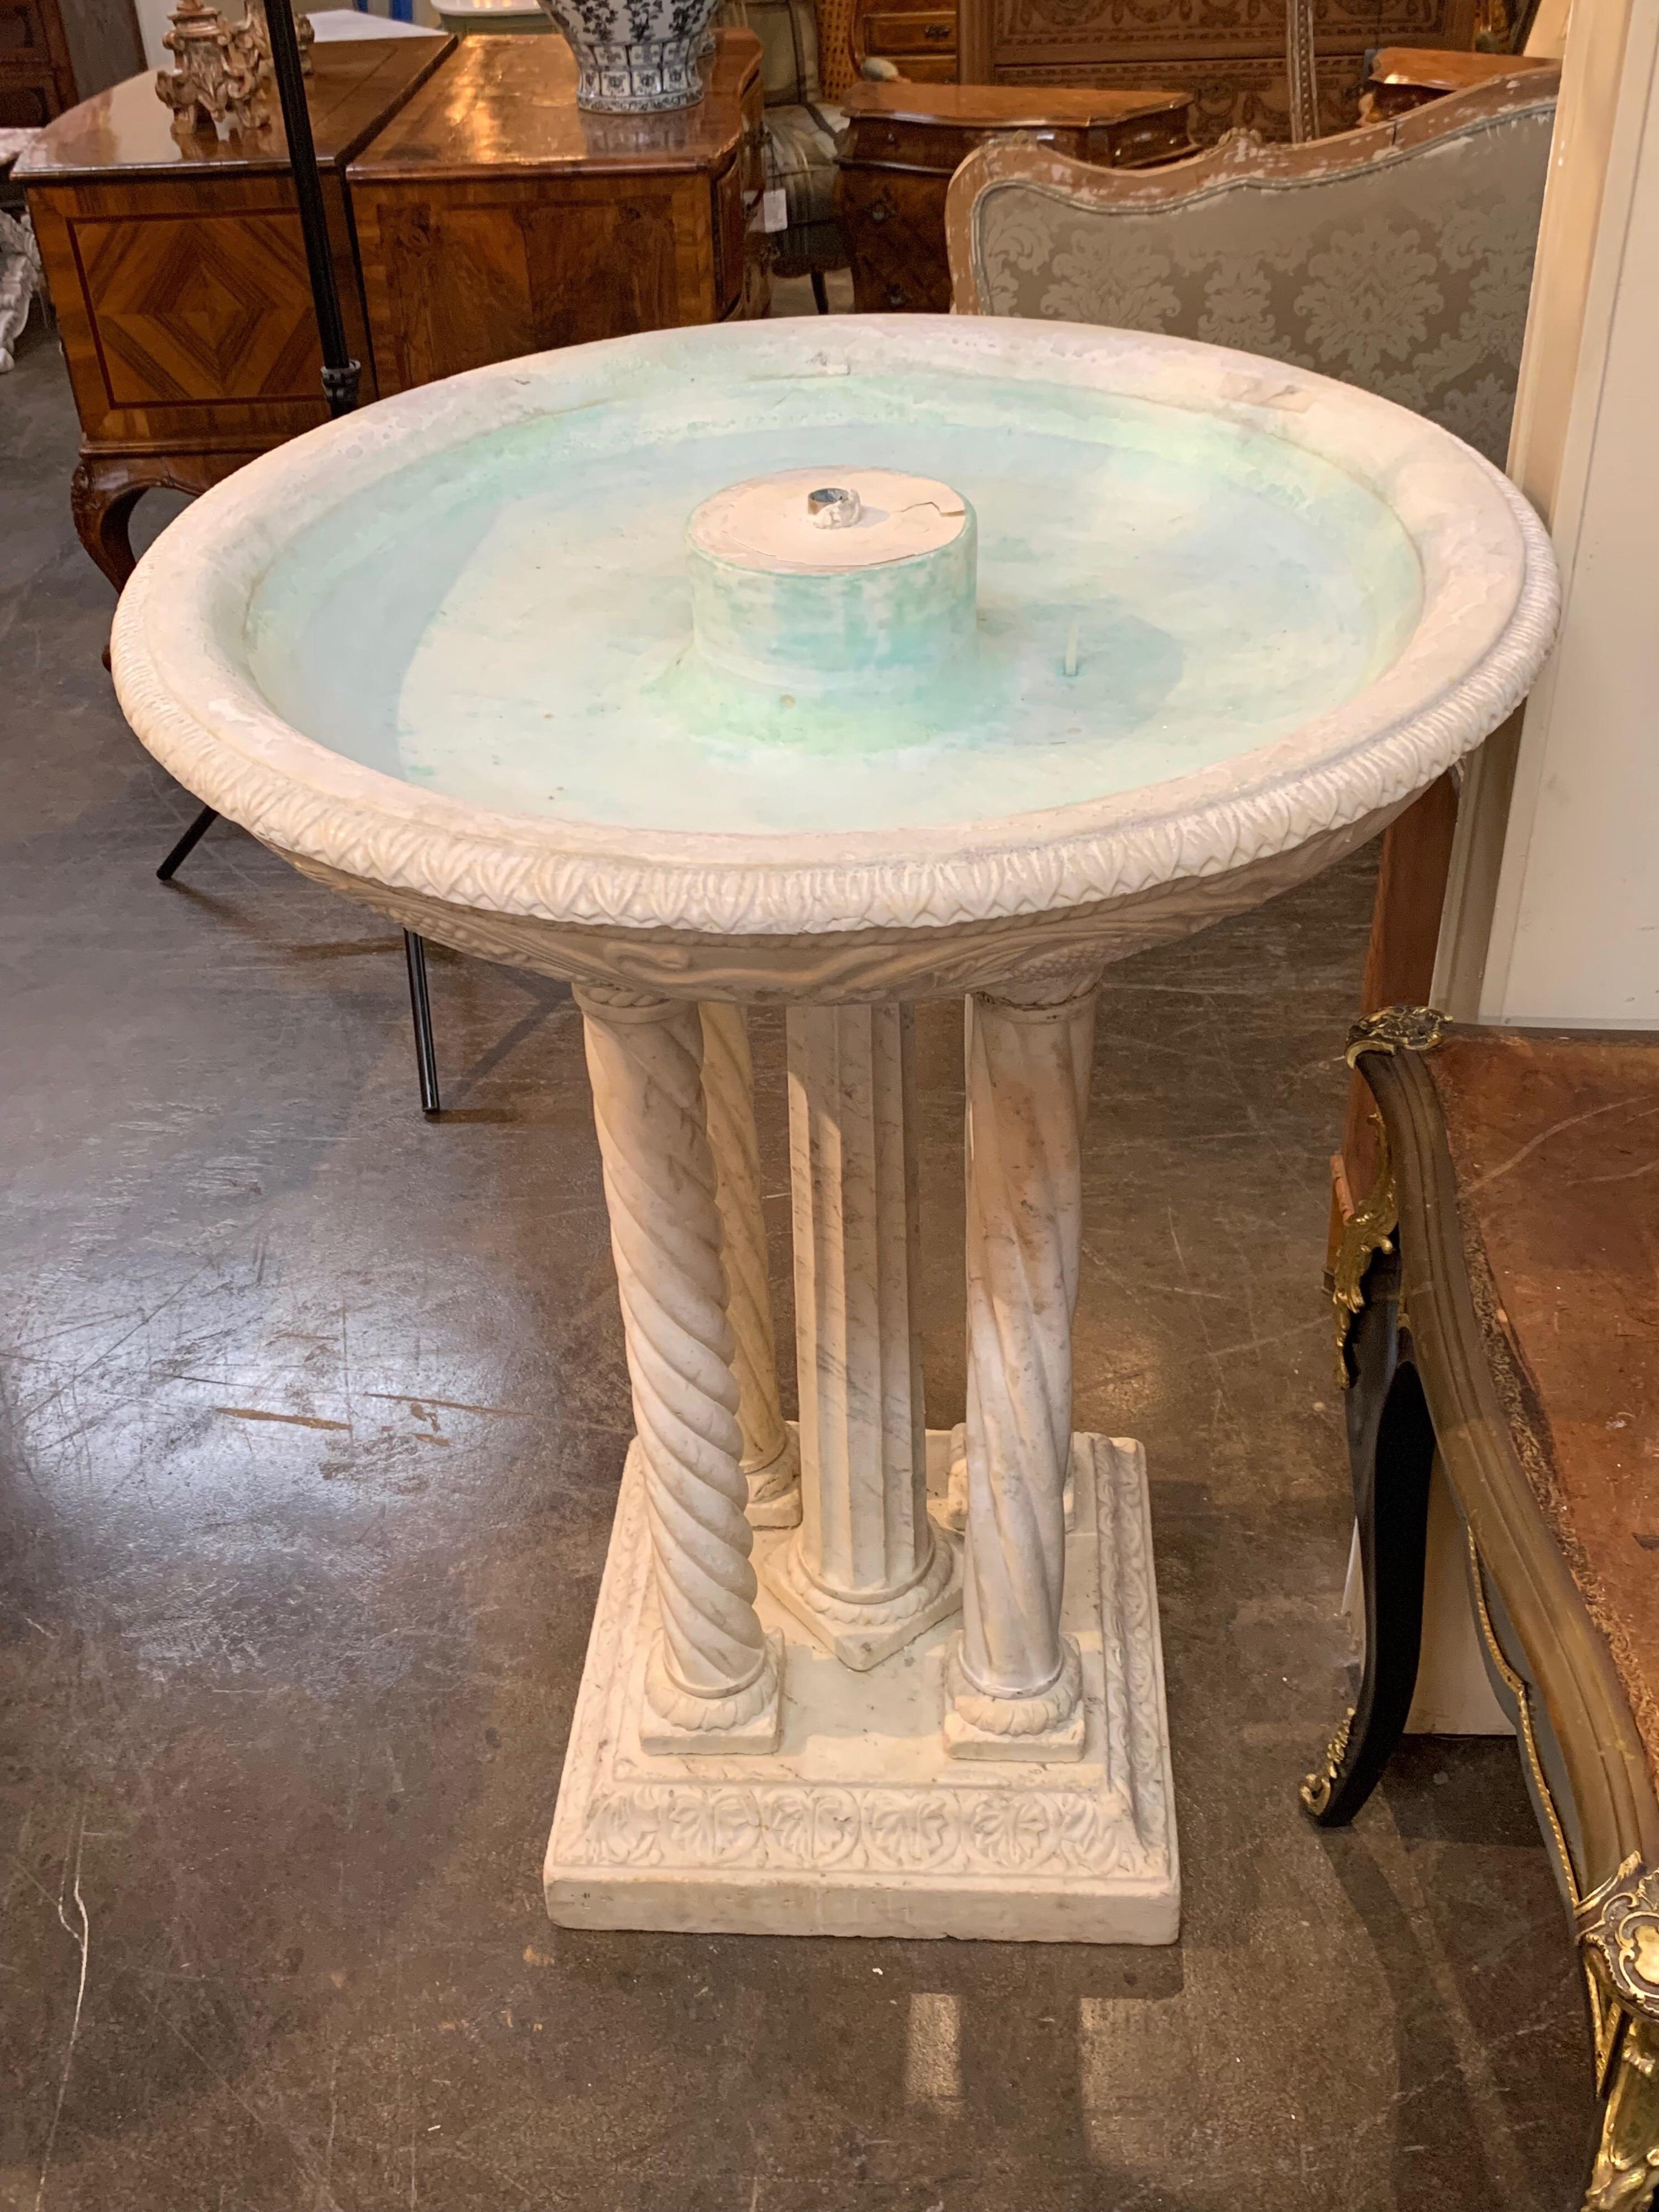 Beautifully hand carved 19th century Italian Carrara marble fountain. Very fine craftsmanship. Fountain can be used with or without the top piece.